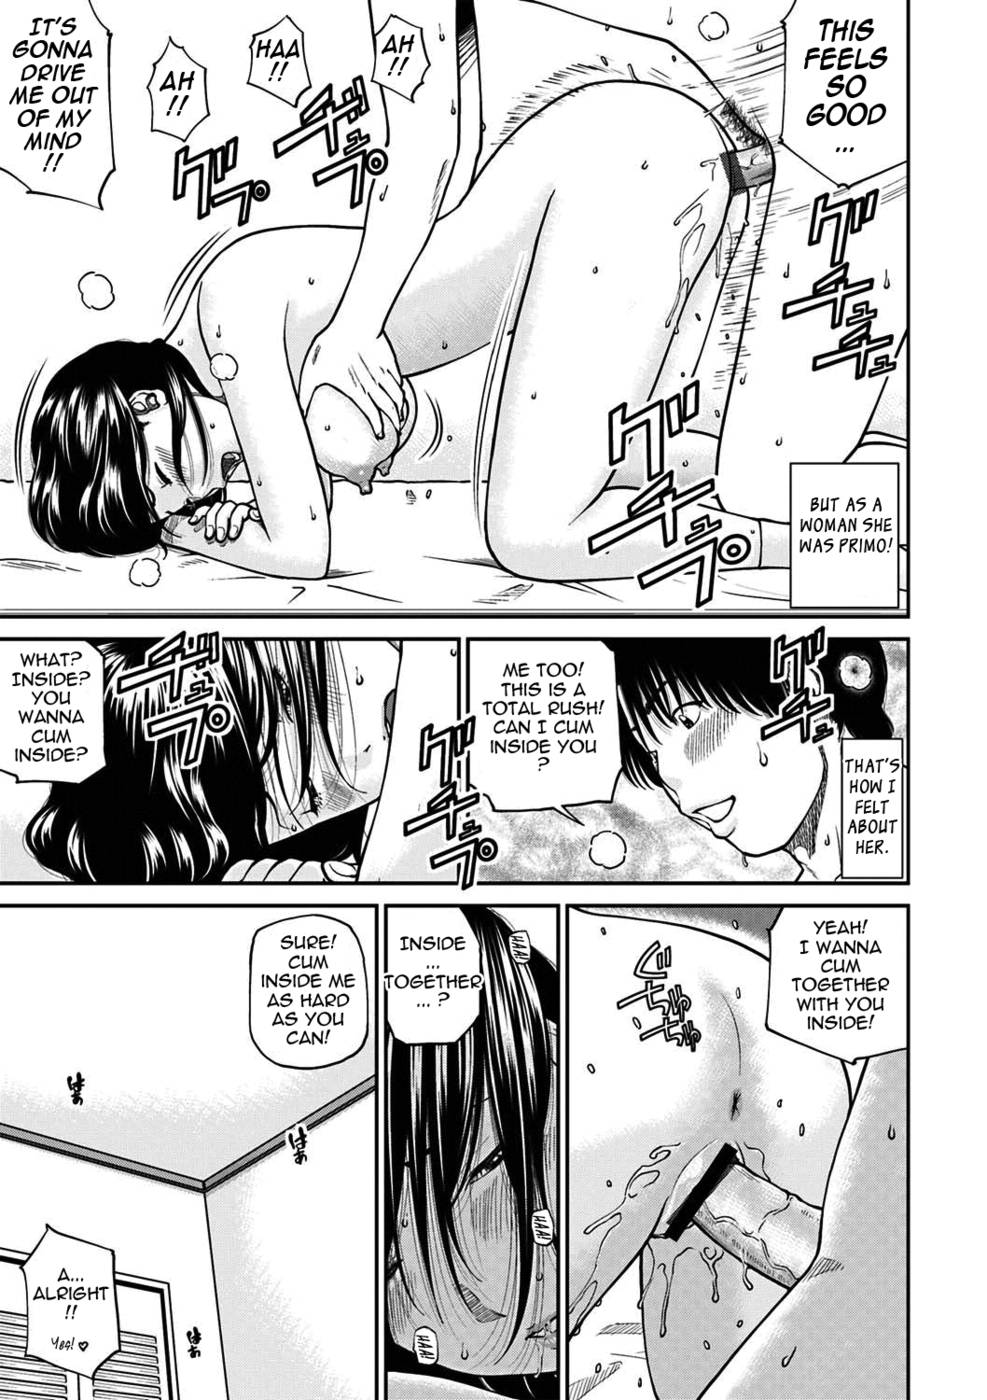 Hentai Manga Comic-33 Year Old Unsatisfied Wife-Chapter 6-Christmas Eve With A Married Woman-17